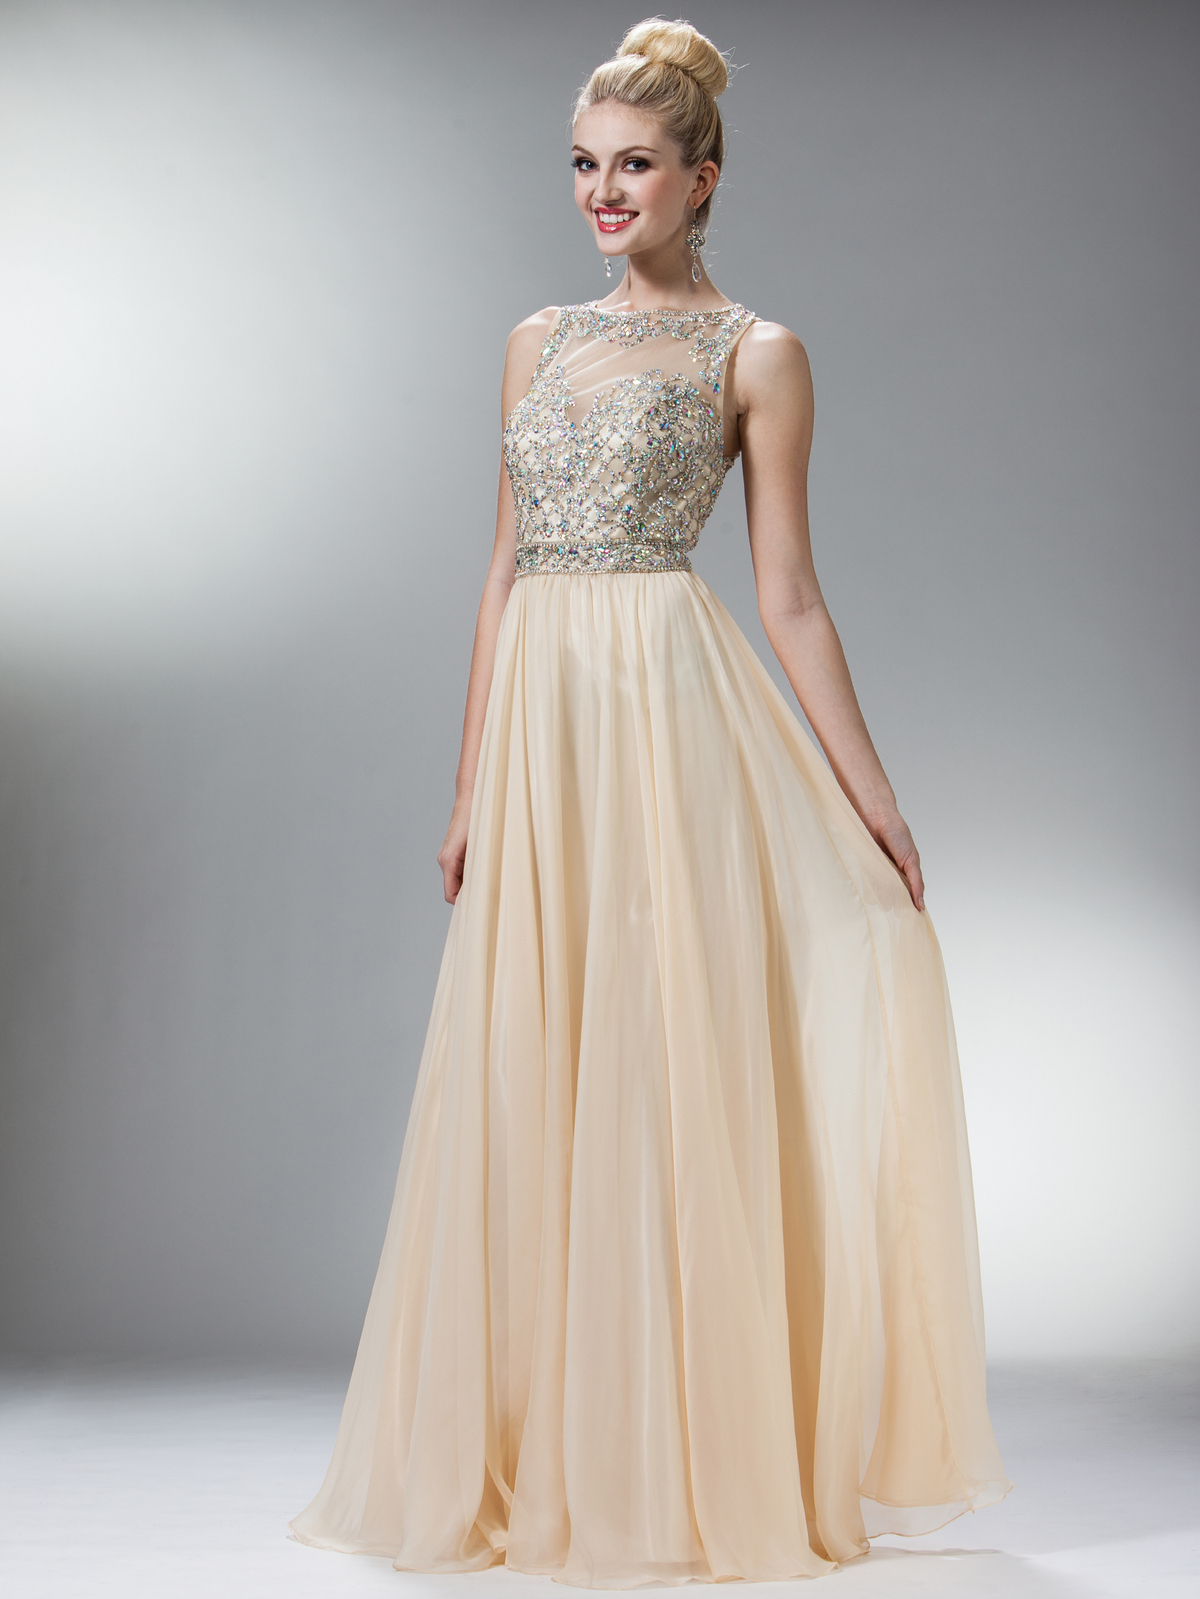 Stunning Strapless Sweetheart Gems Prom Dress  Sung Boutique L.A.